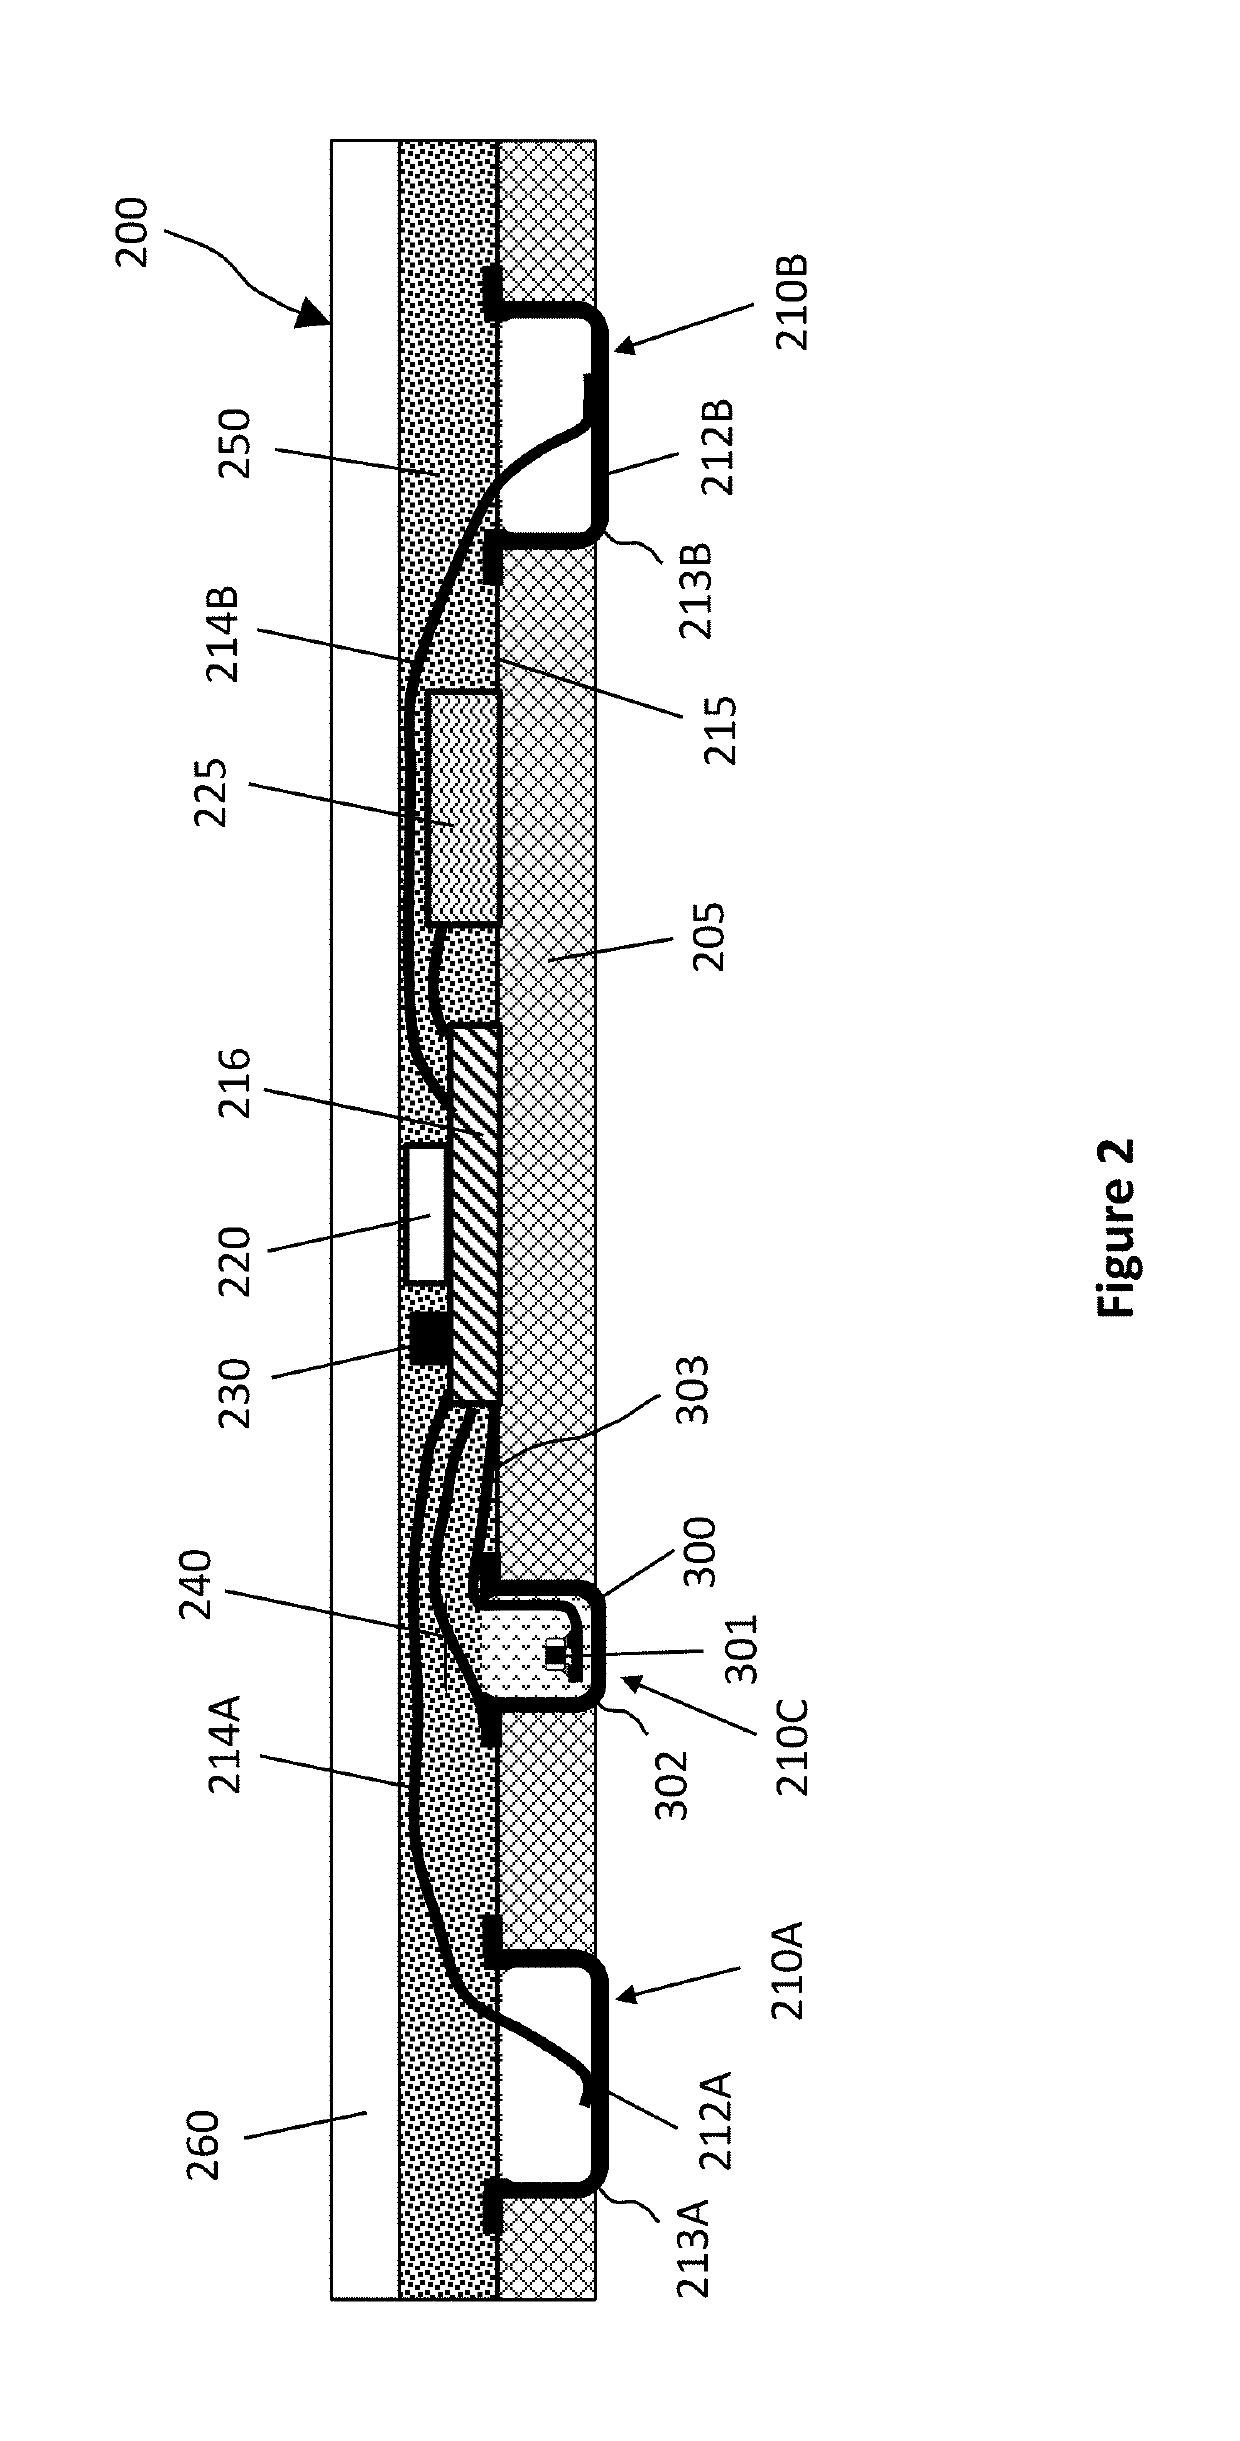 Multi-purpose wearable patch for measurement and treatment